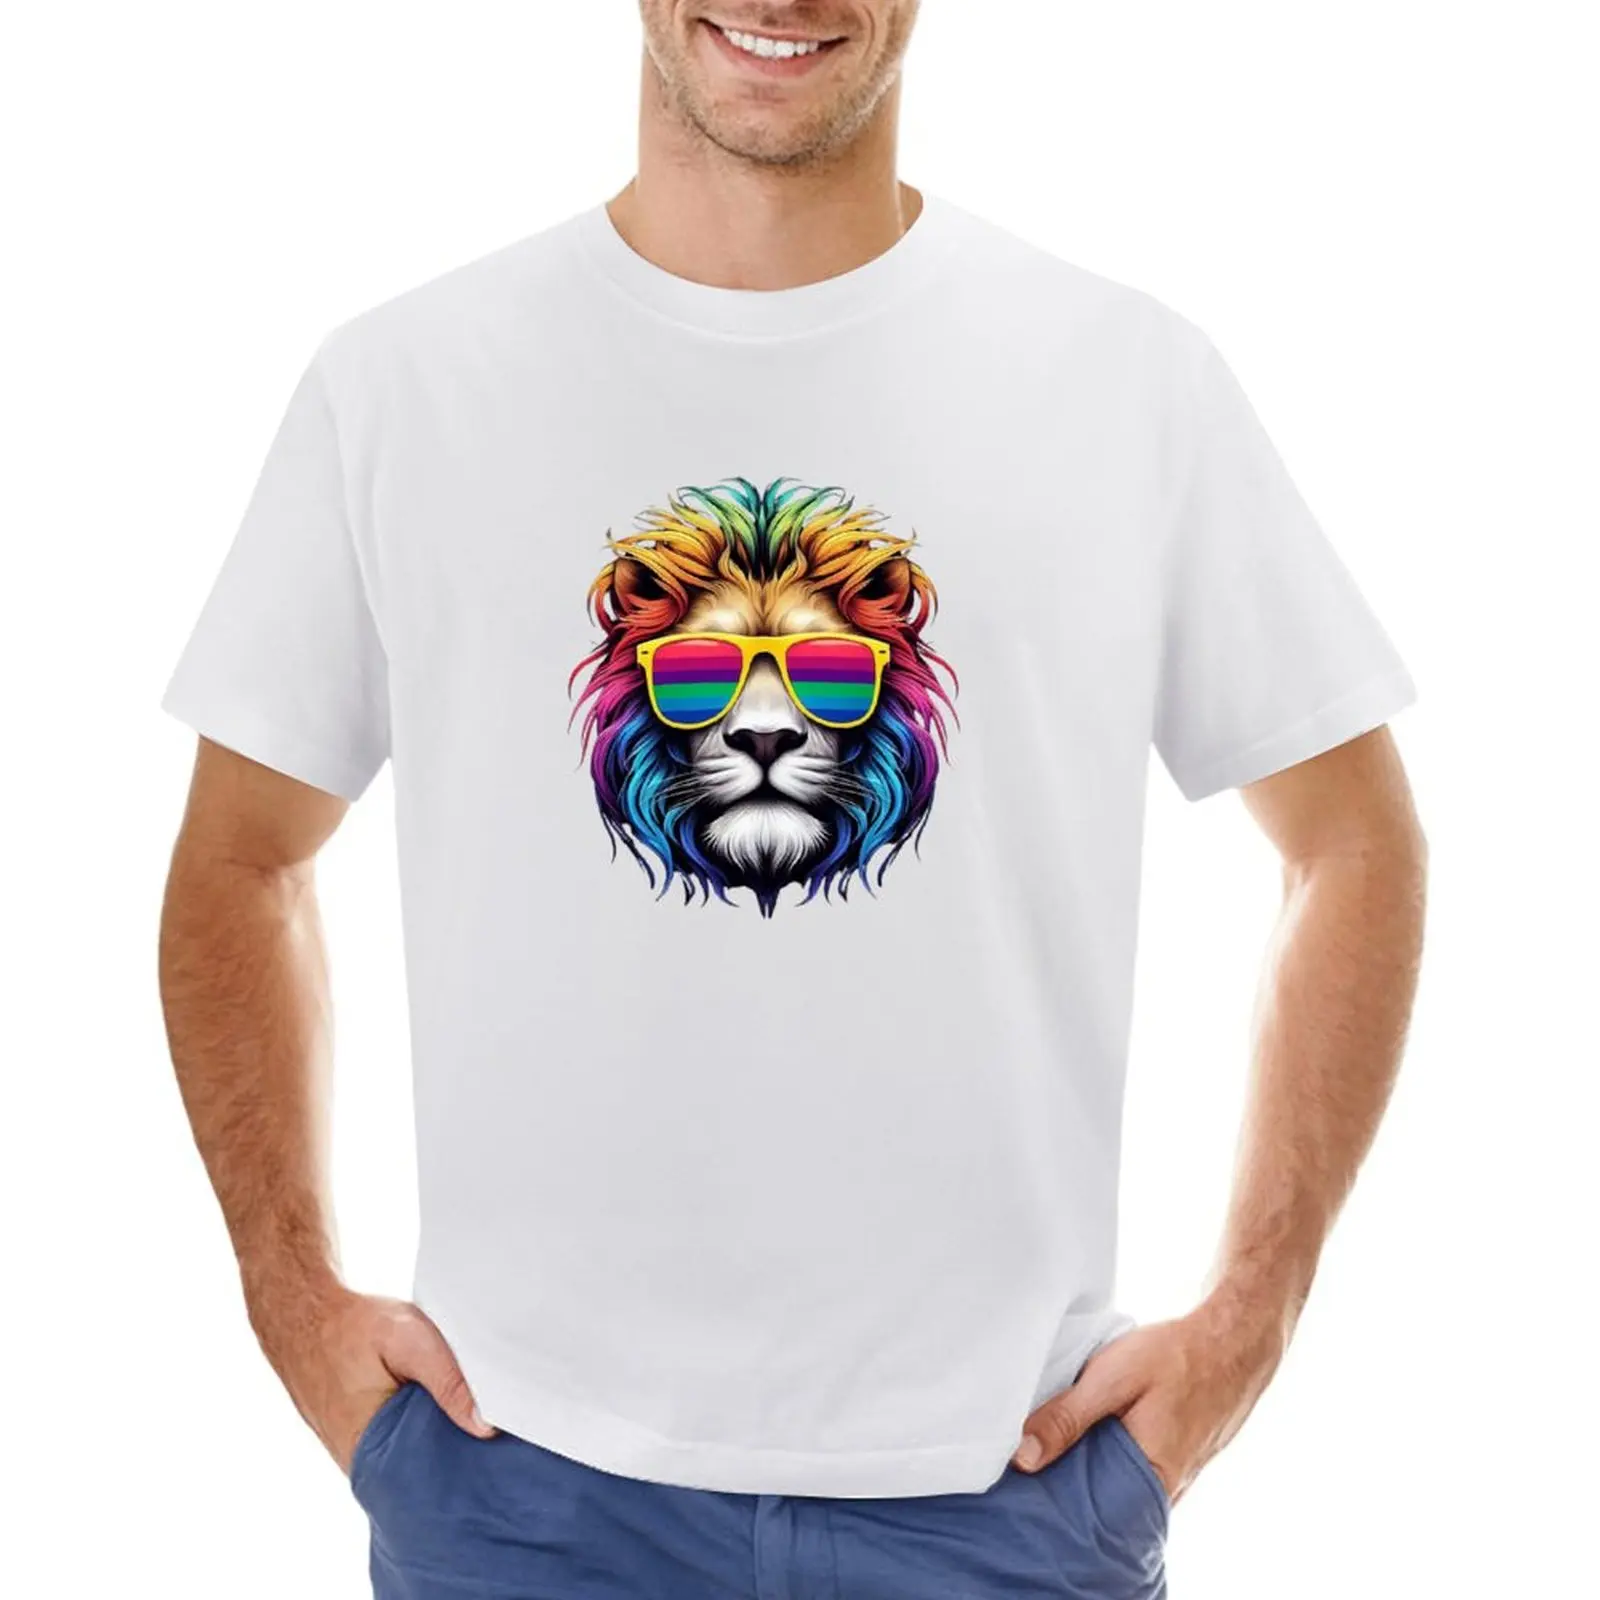 

Cool Lion with Rainbow Sunglasses and Manes T-shirt aesthetic clothes customs customizeds plain mens graphic t-shirts